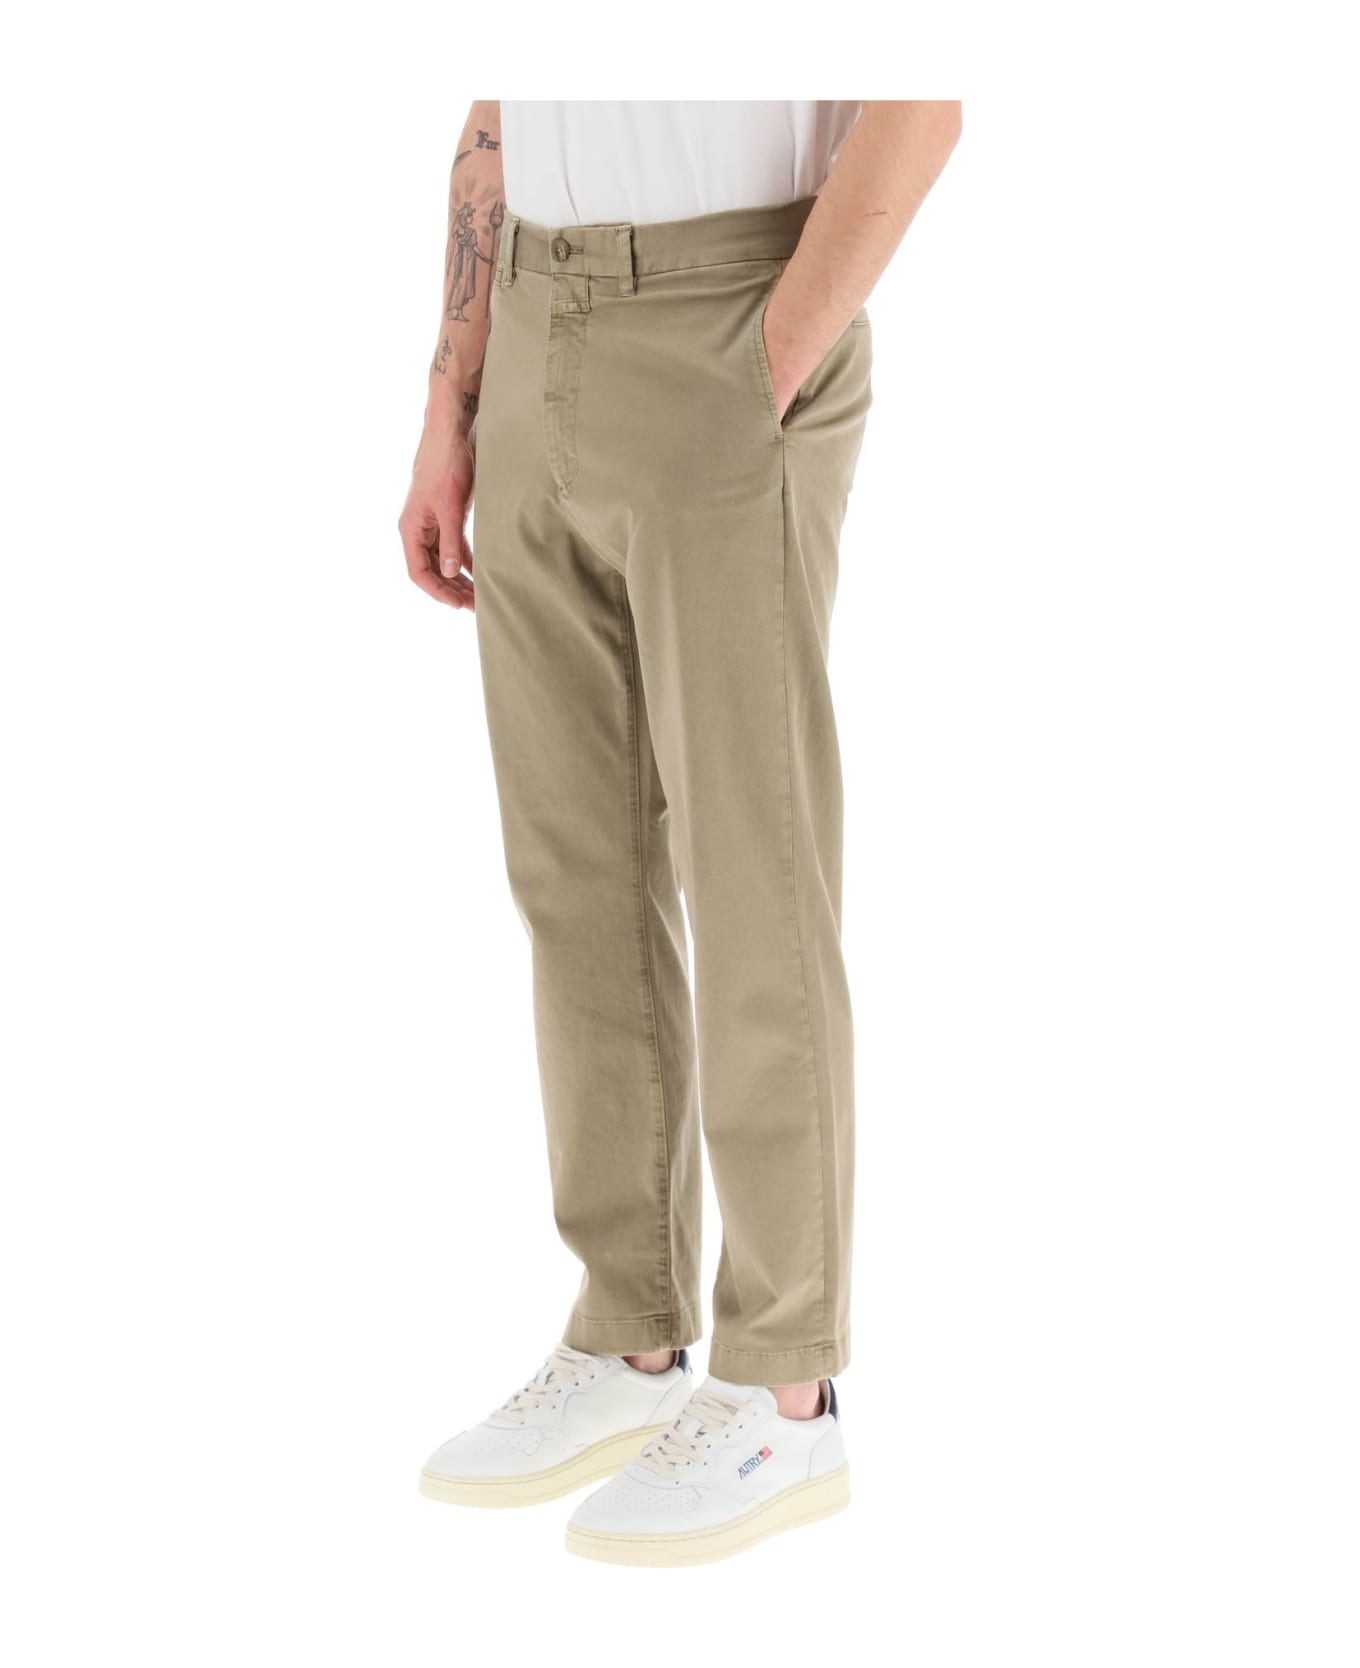 Closed 'tacoma' Tapered Pants - AFRICAN SAND (Beige)